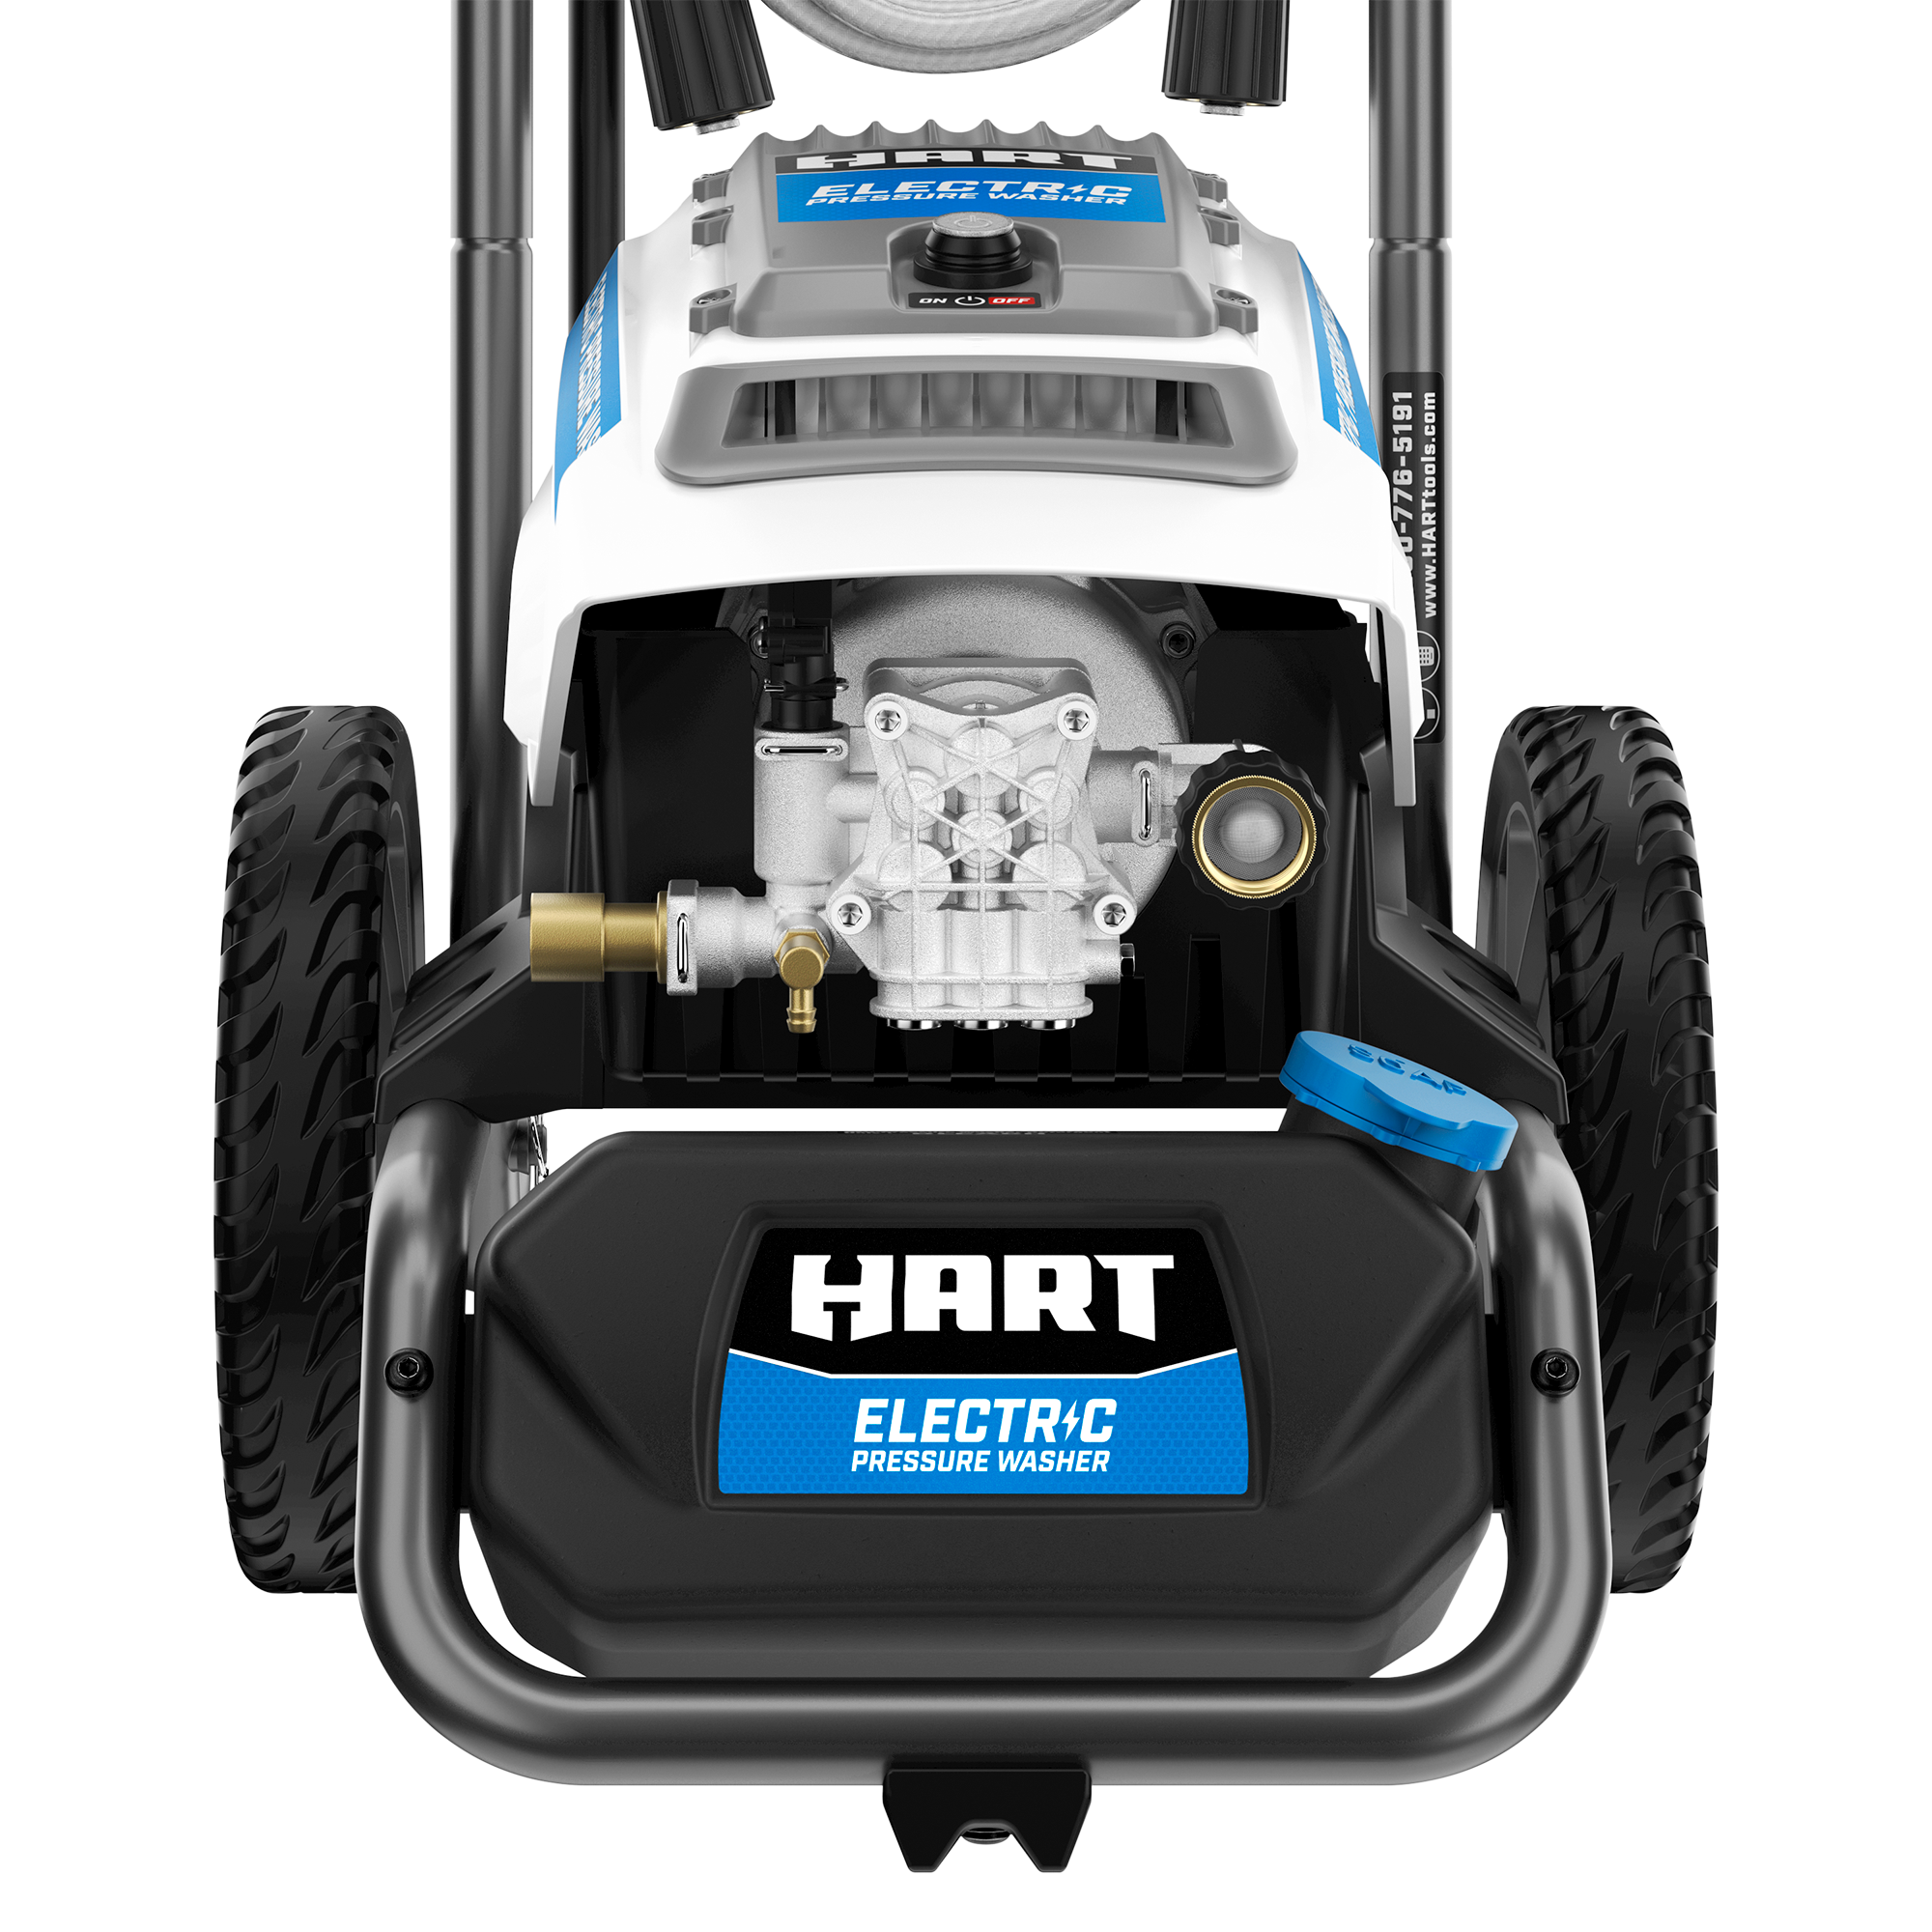 HART 2000PSI 1.2 GPM Electric Pressure Washer - image 5 of 10